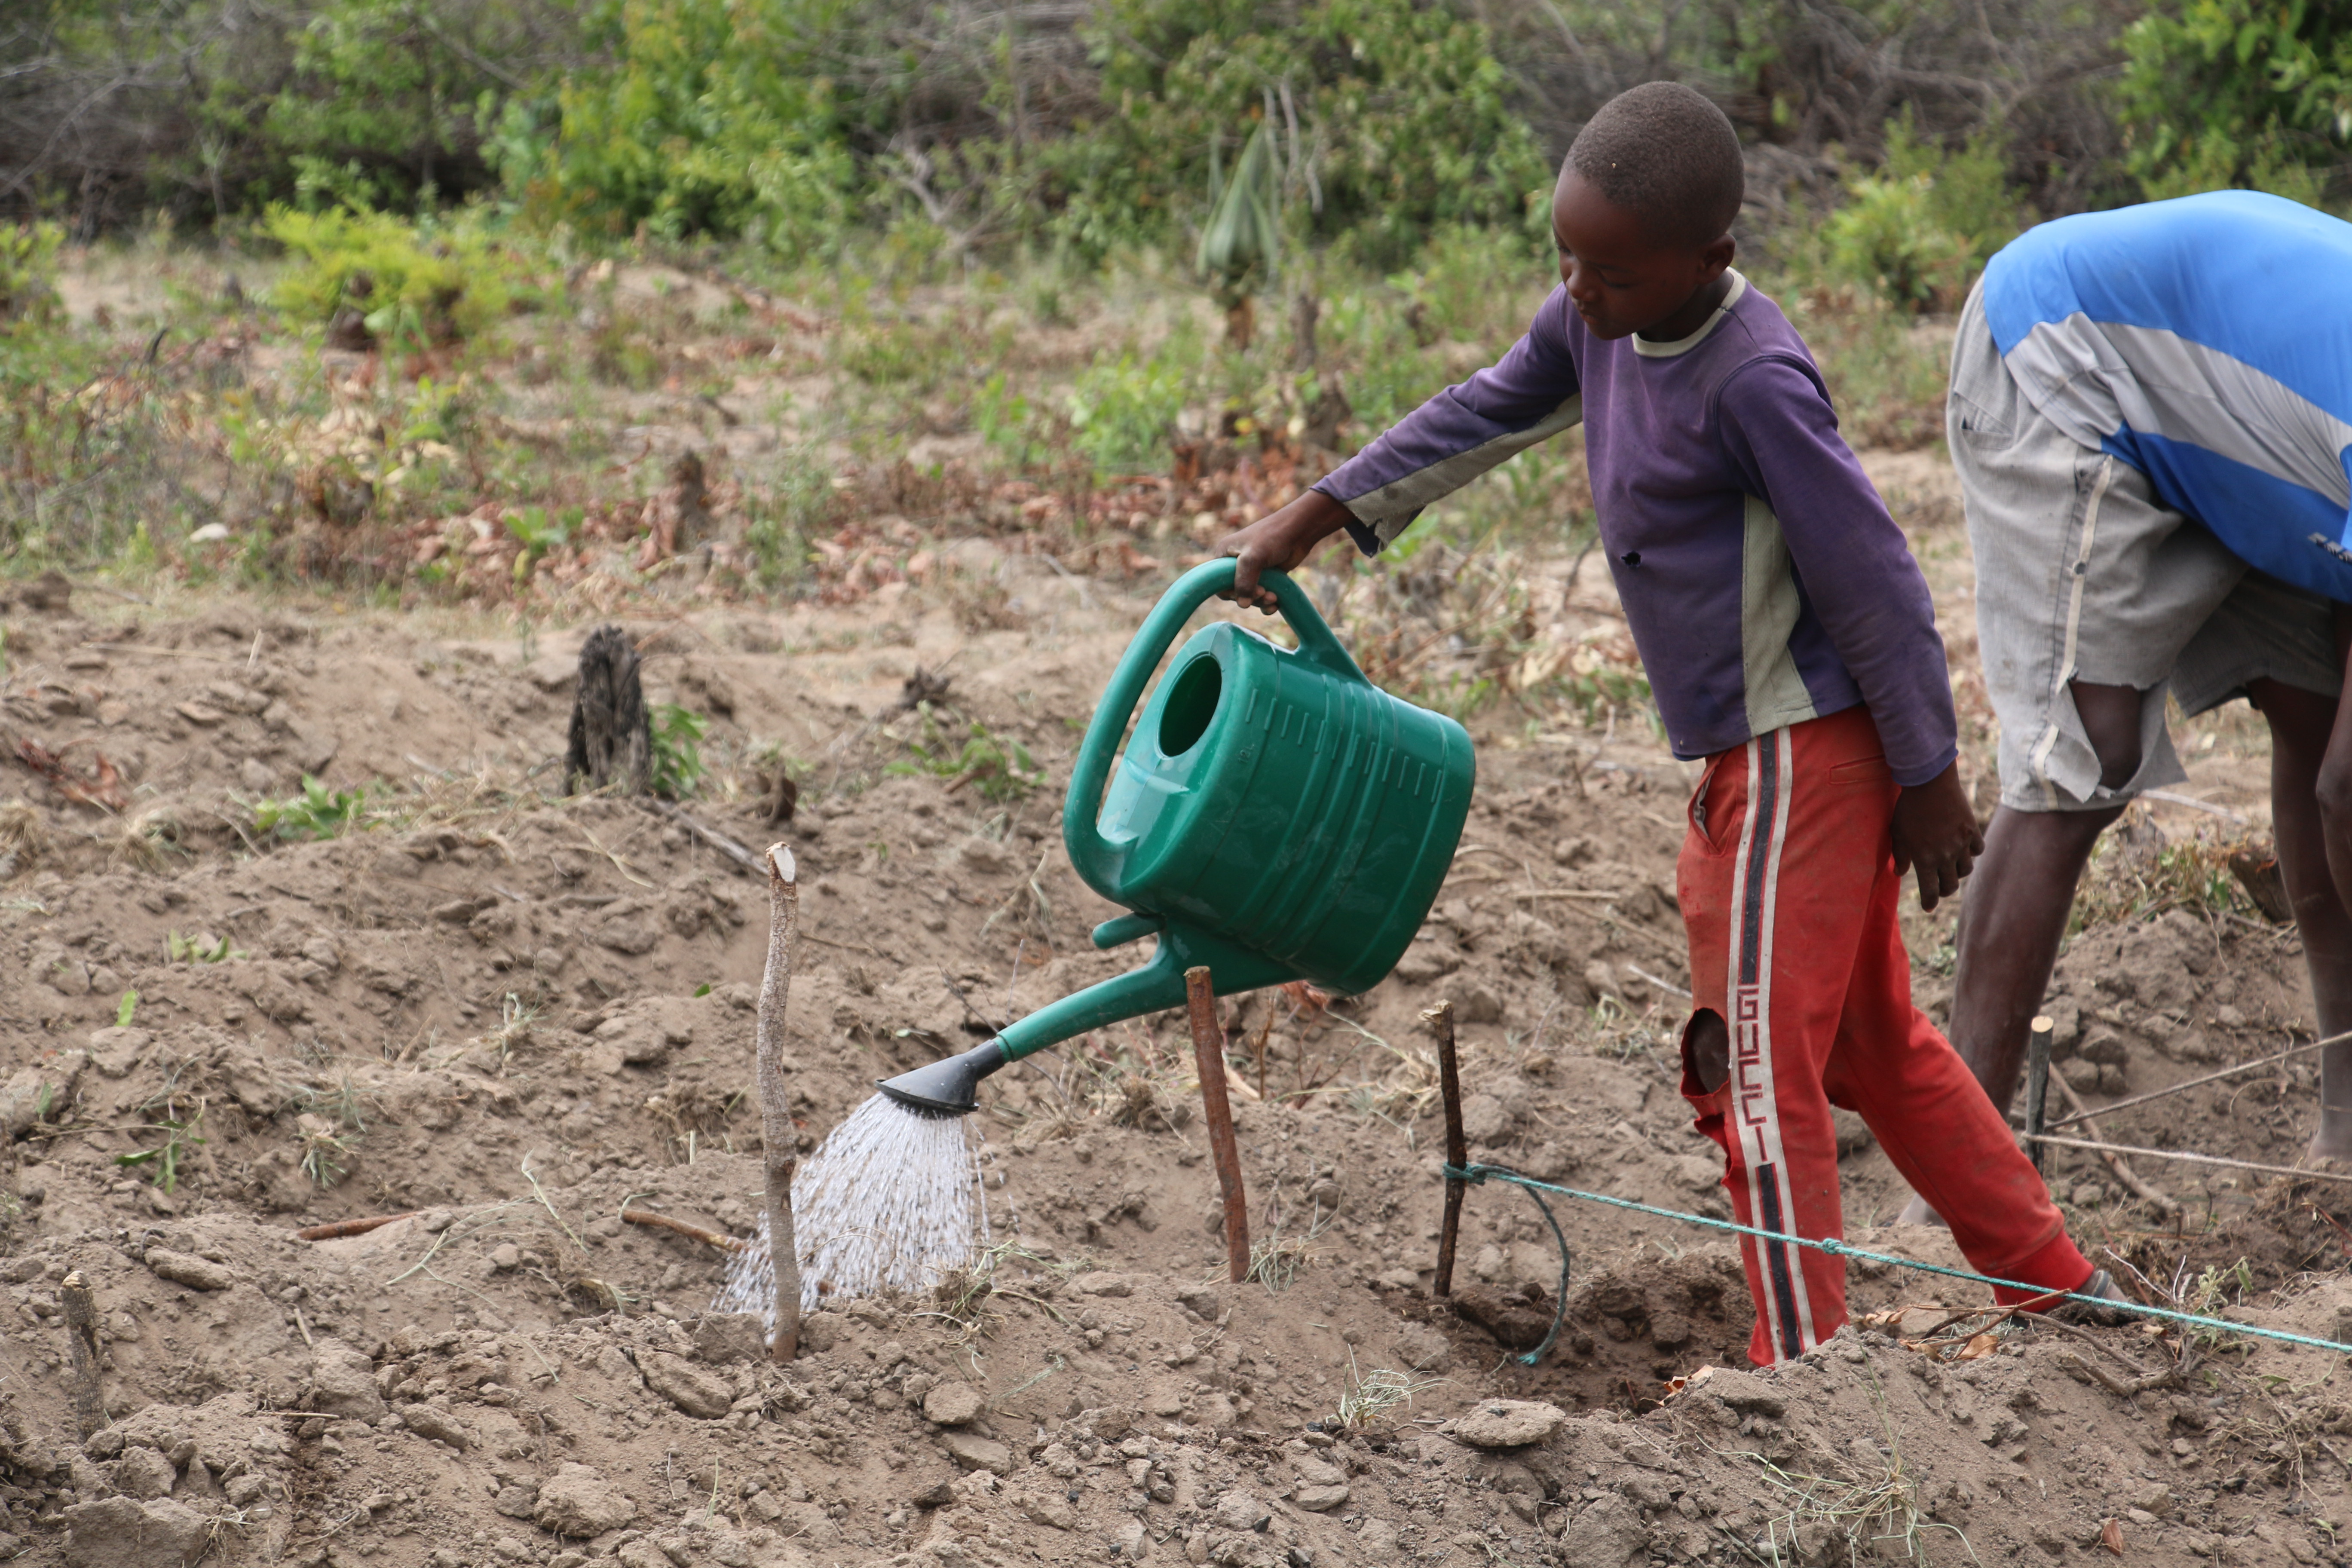 Addressing climate change through drought-resistant crops in Angola